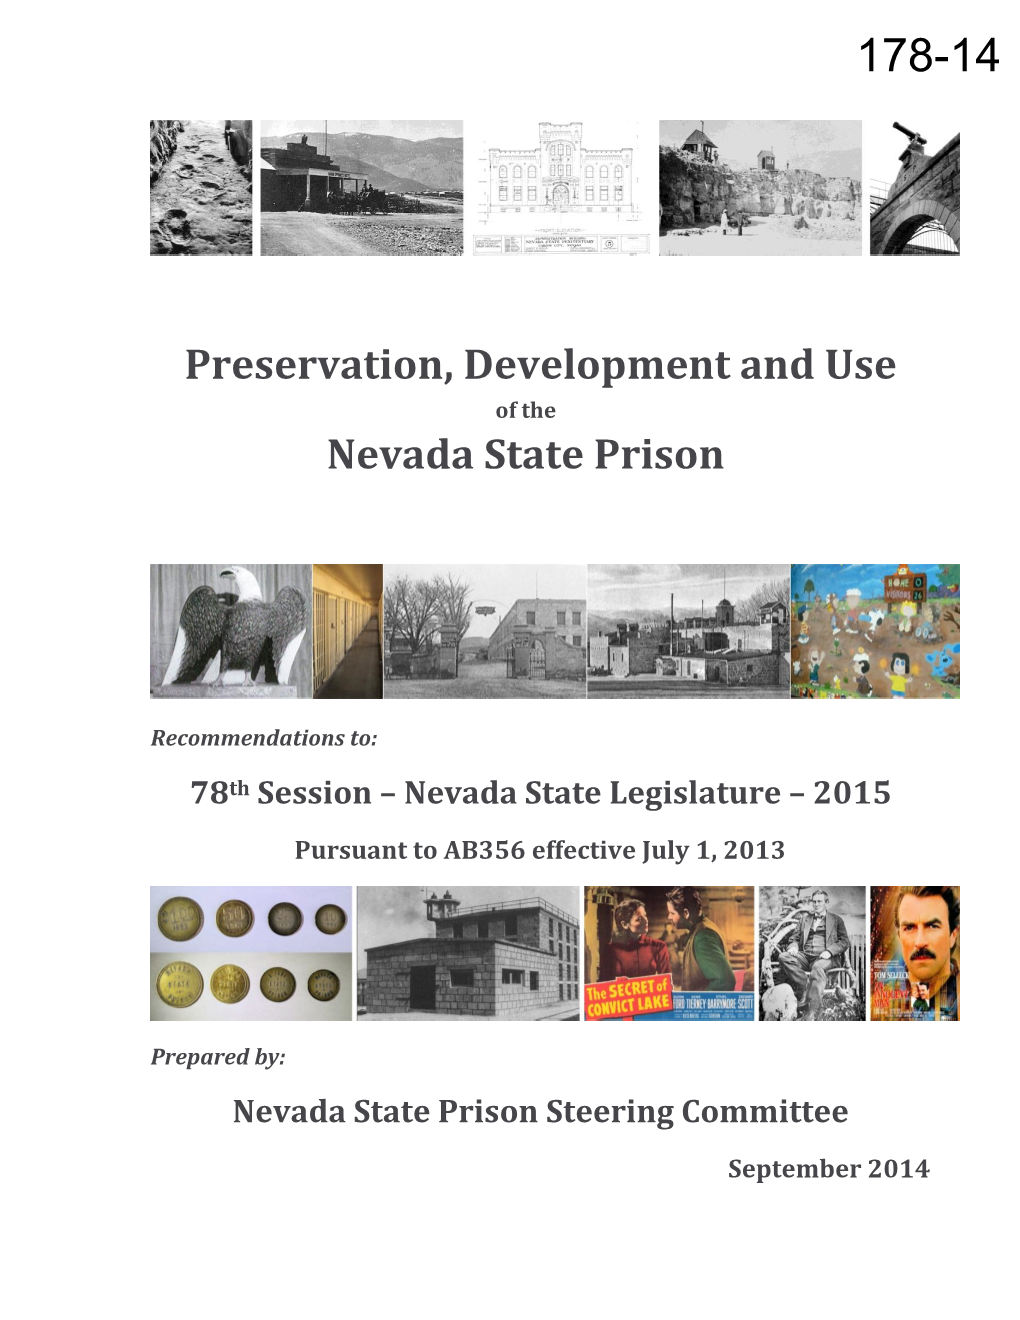 178-14: Preservation, Development and Use of the Nevada State Prison